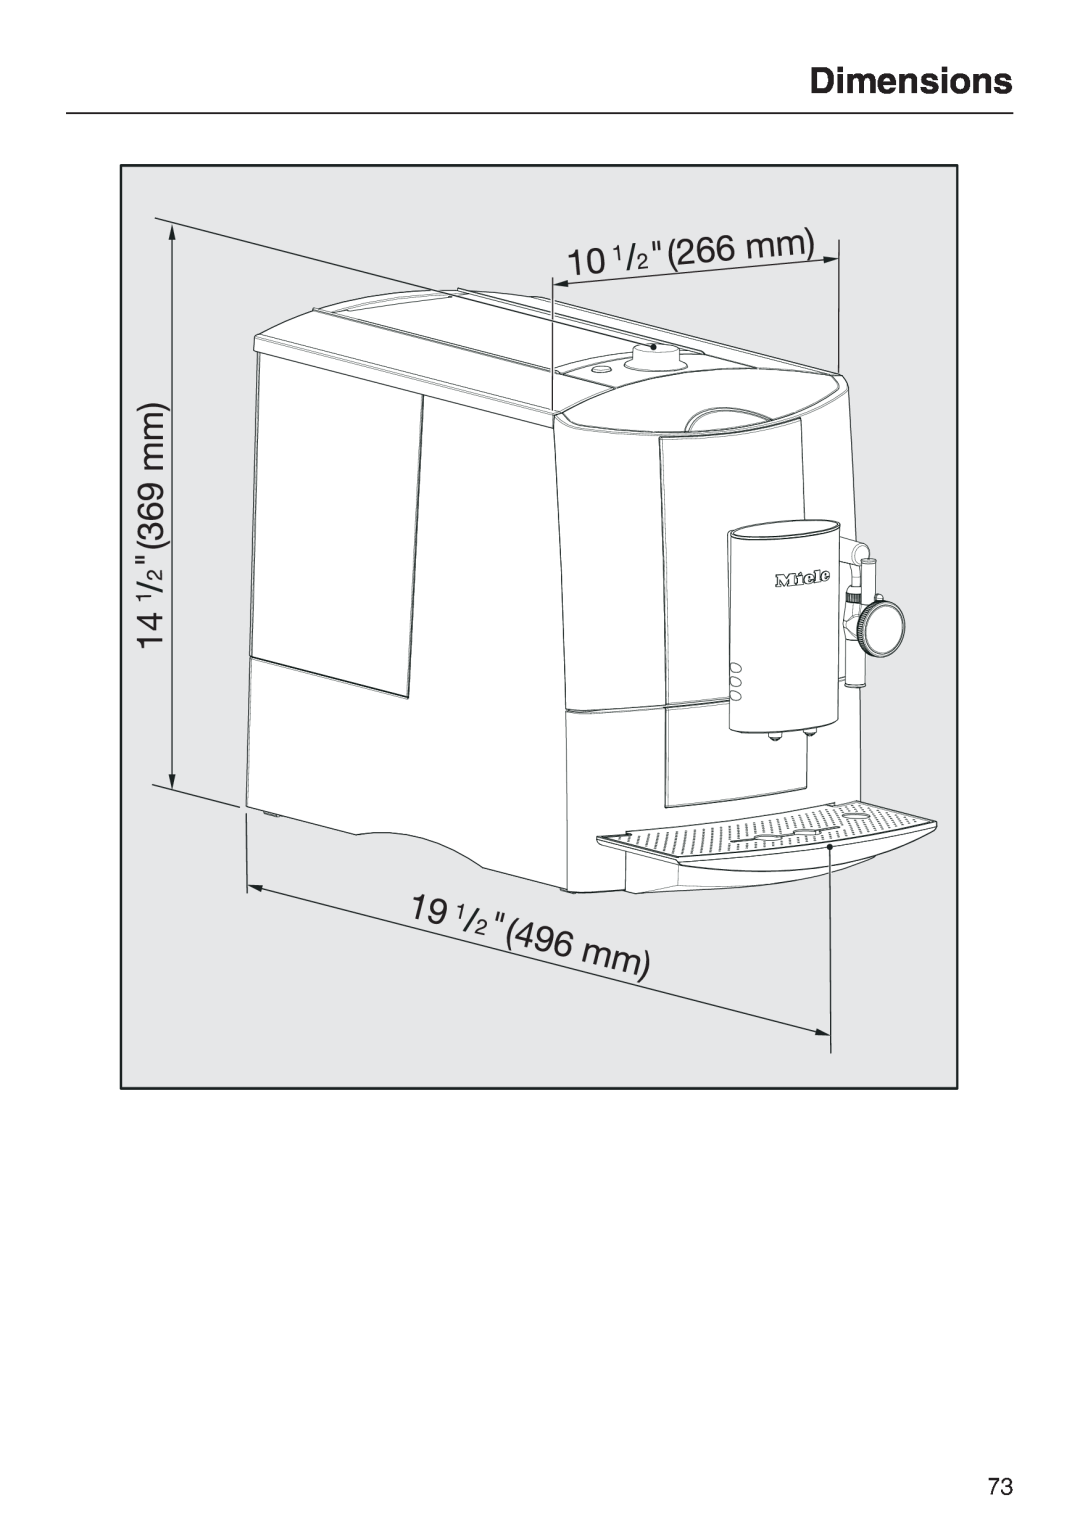 Miele CM 5000 operating instructions Dimensions 